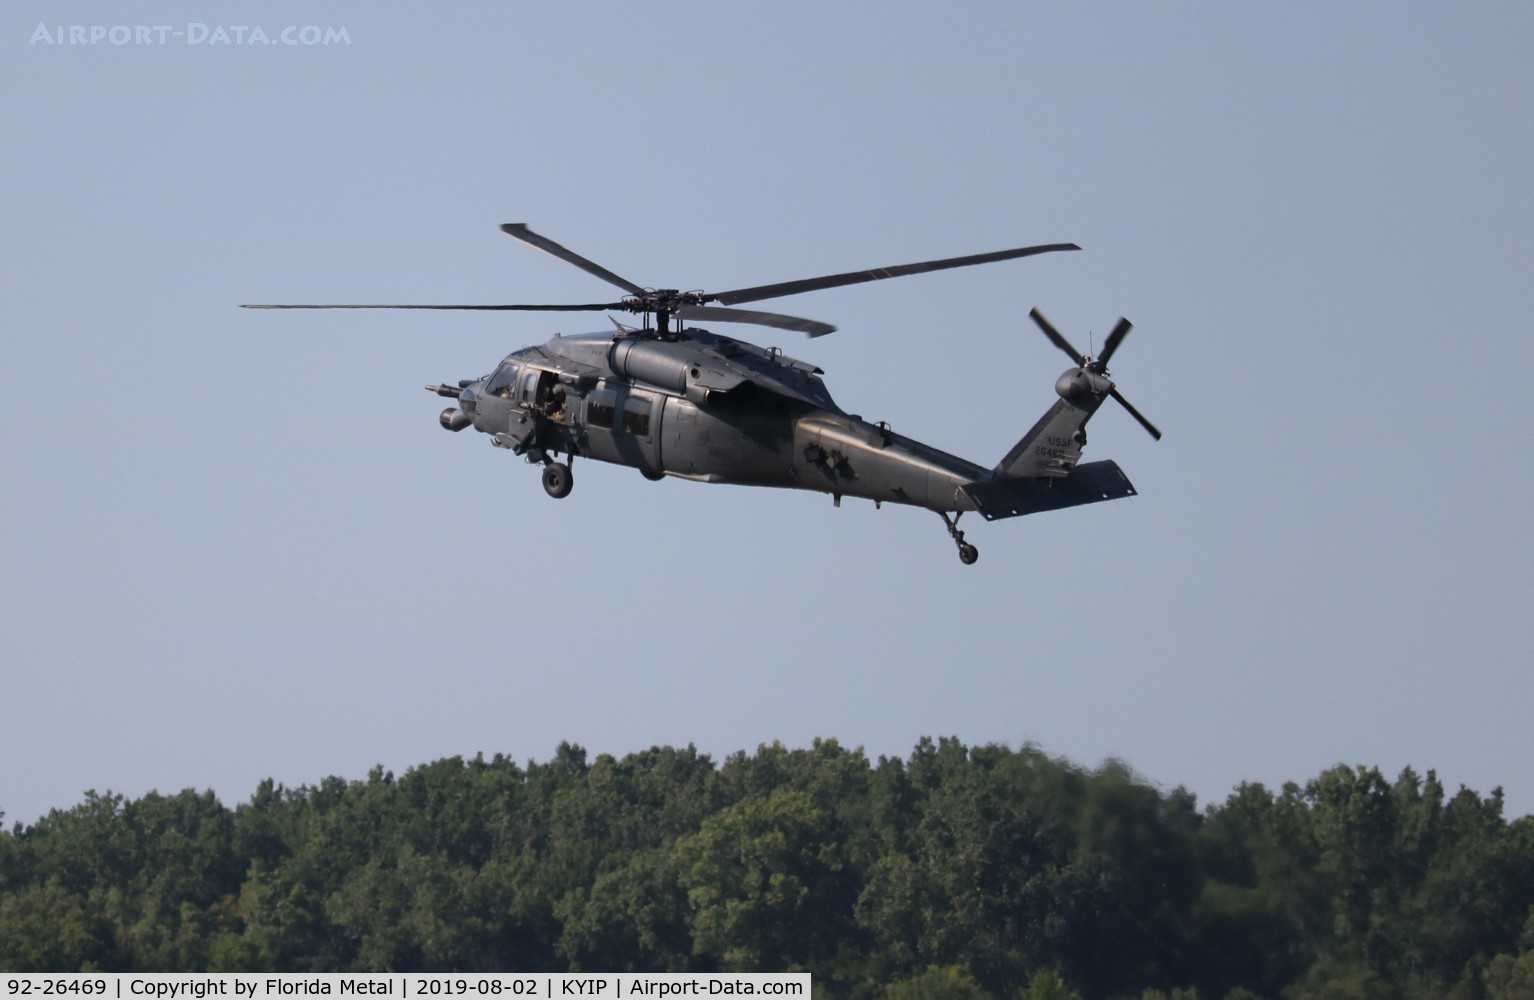 92-26469, 1992 Sikorsky HH-60G Pave Hawk C/N 70-2258, Thunder Over Michigan 2019